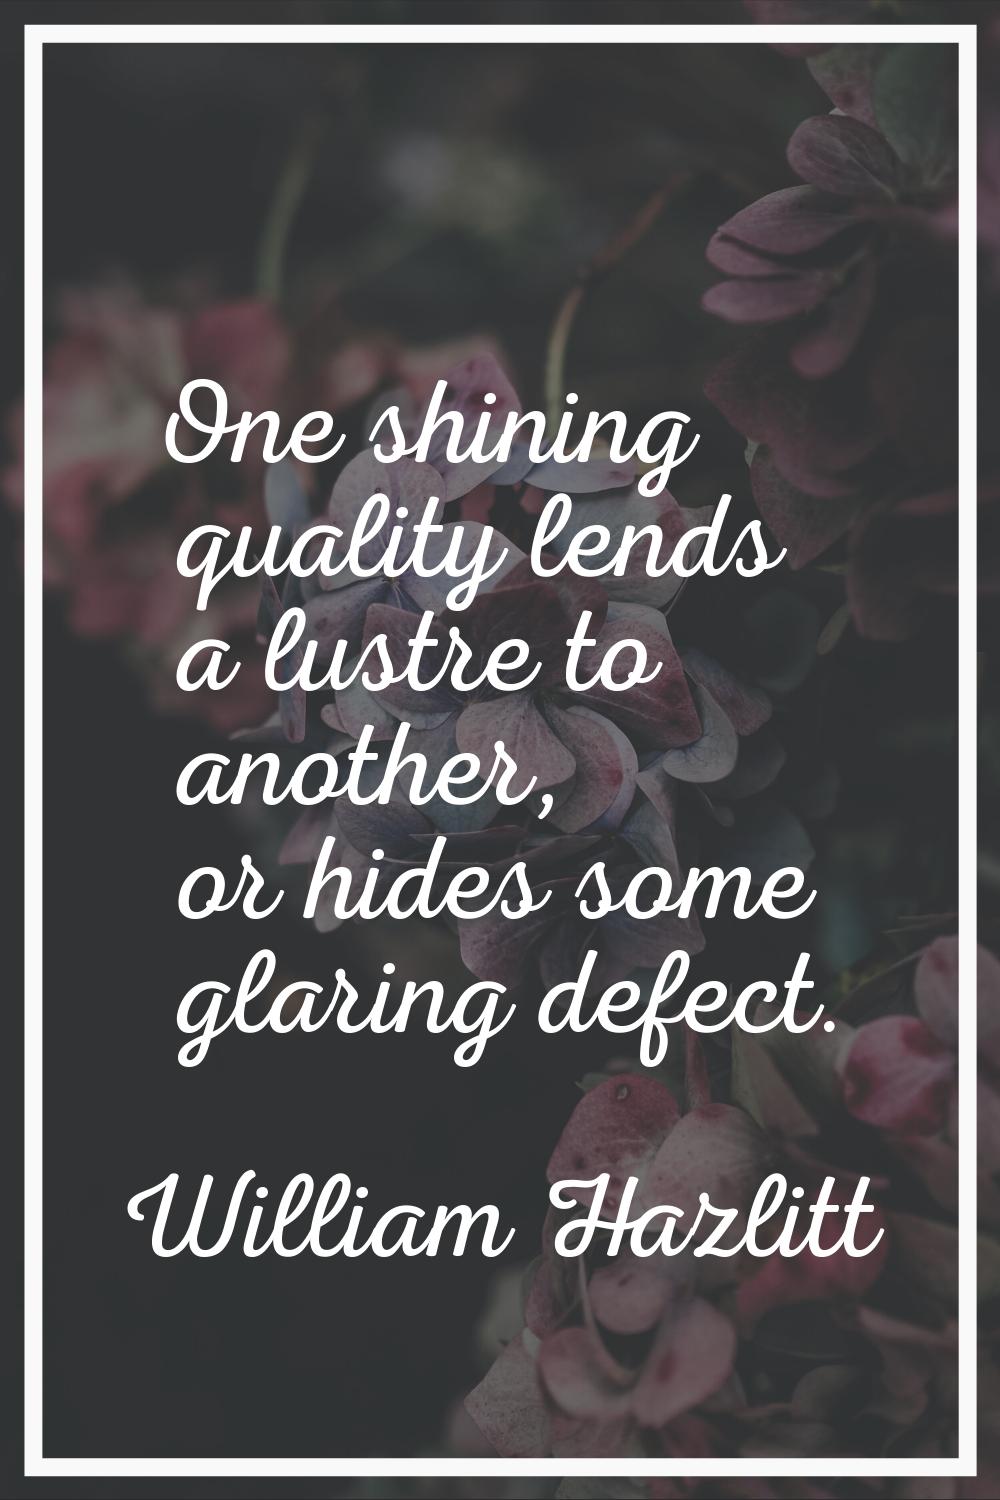 One shining quality lends a lustre to another, or hides some glaring defect.